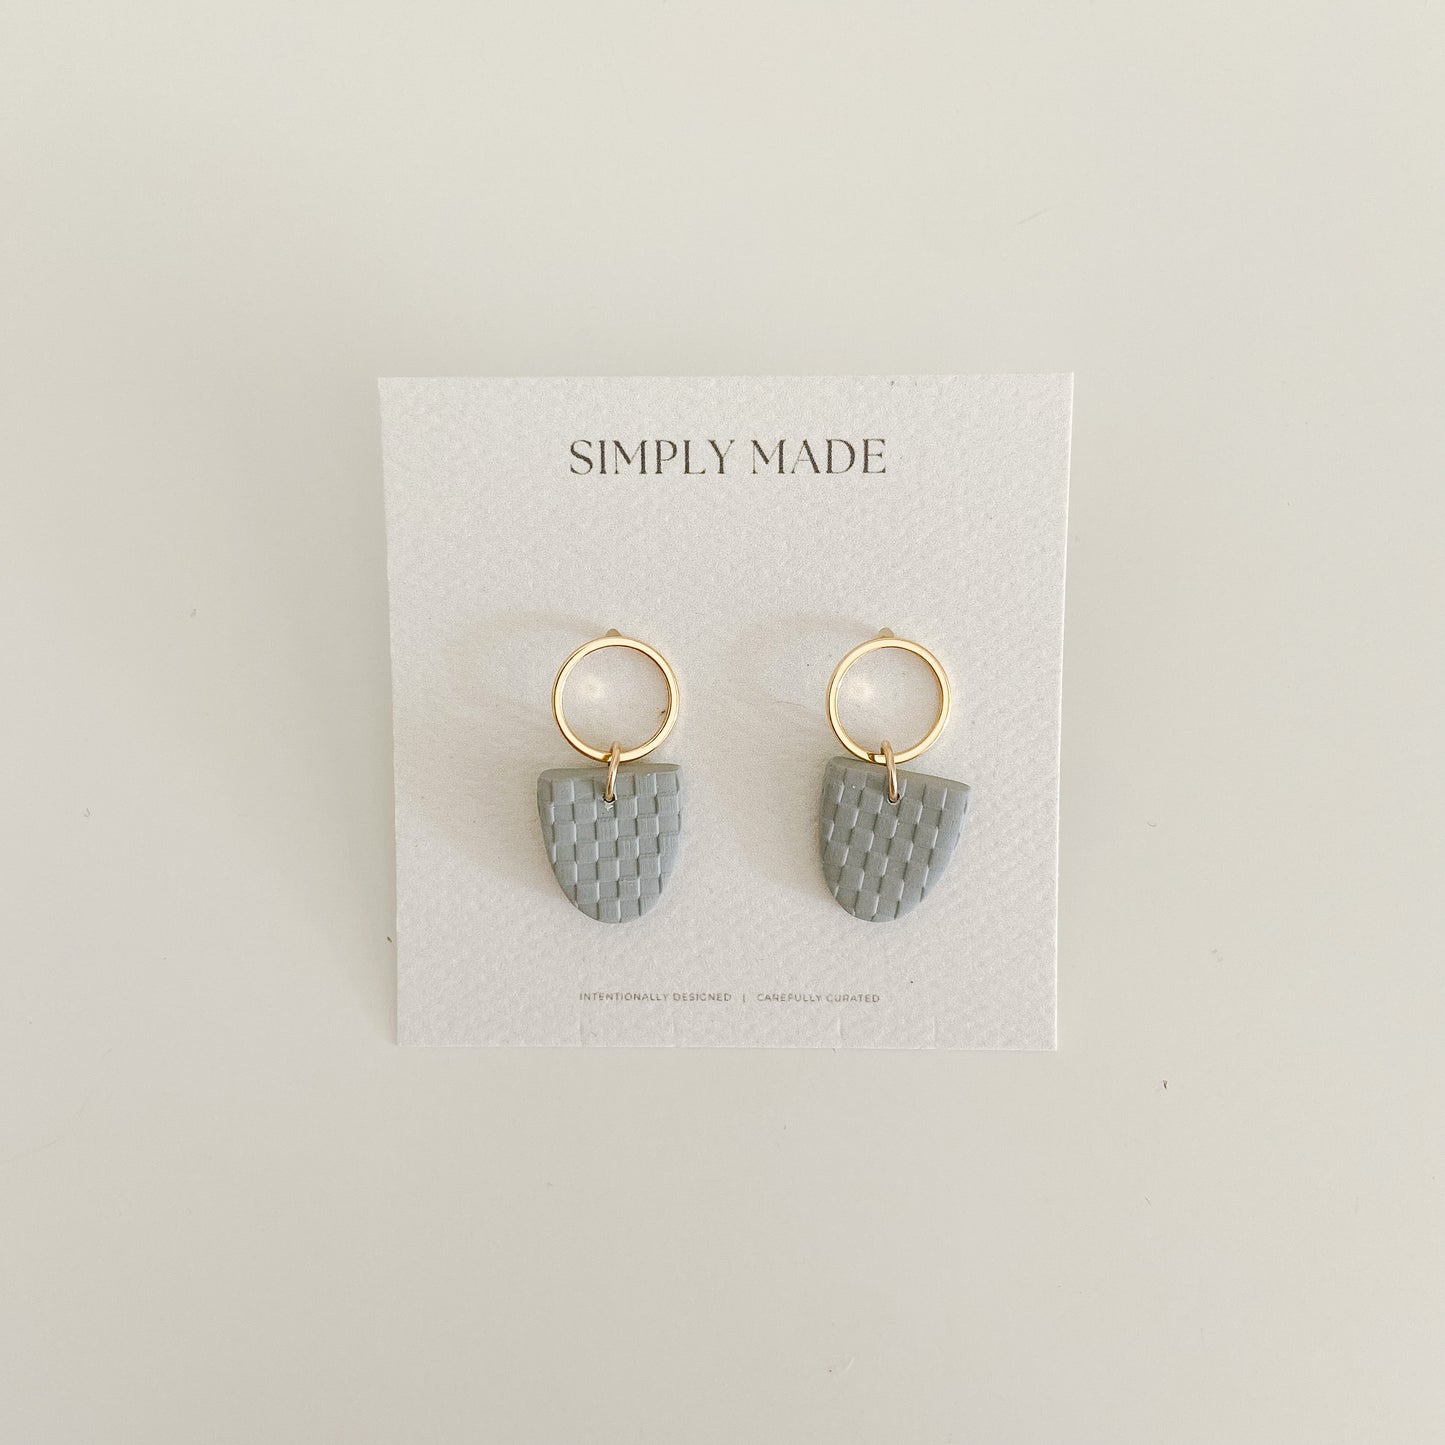 Checkered #3 — clay earrings